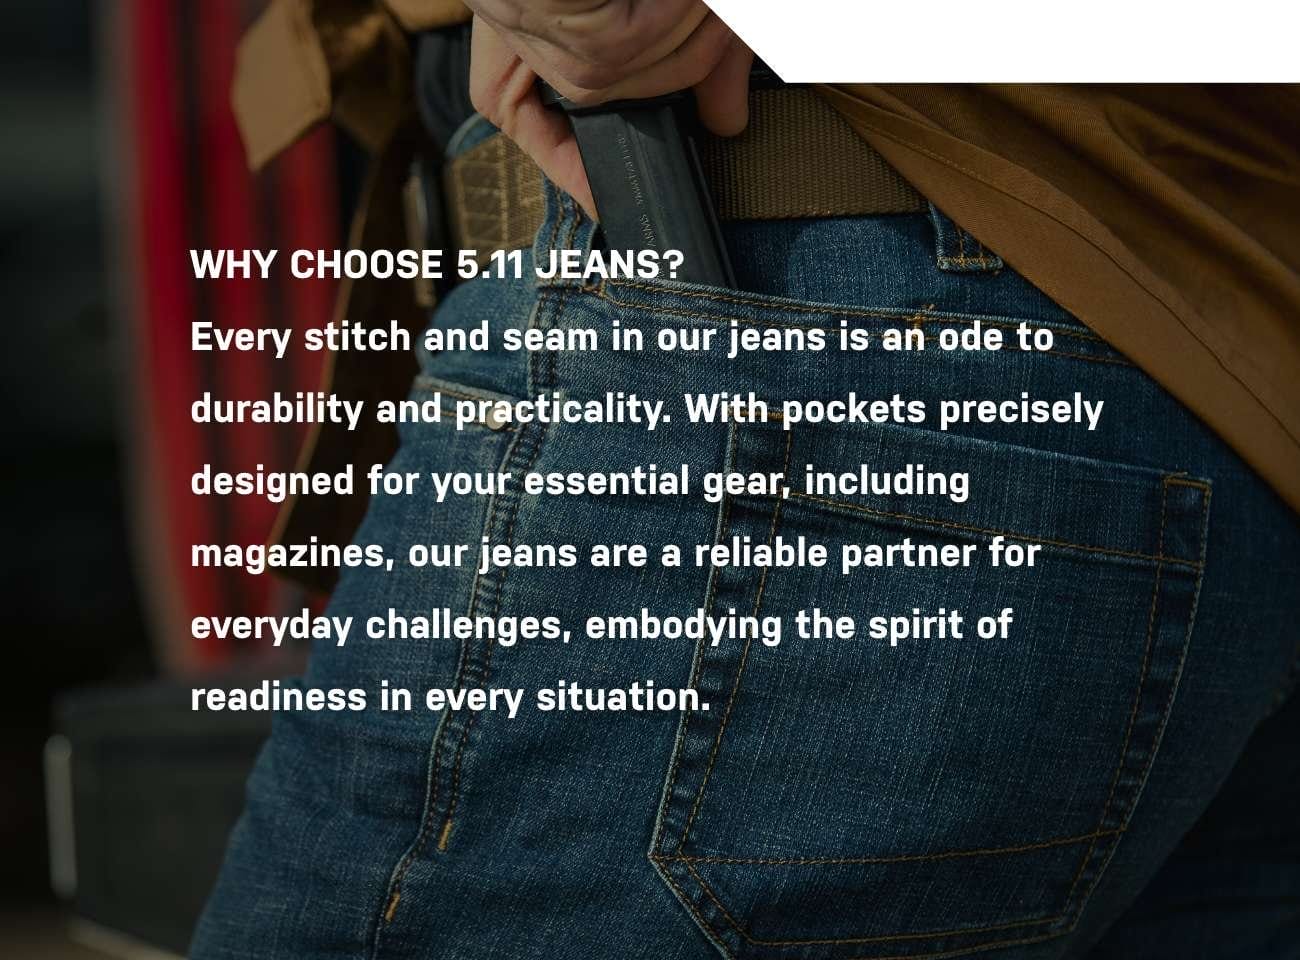 Why choose 5.11 Jeans?